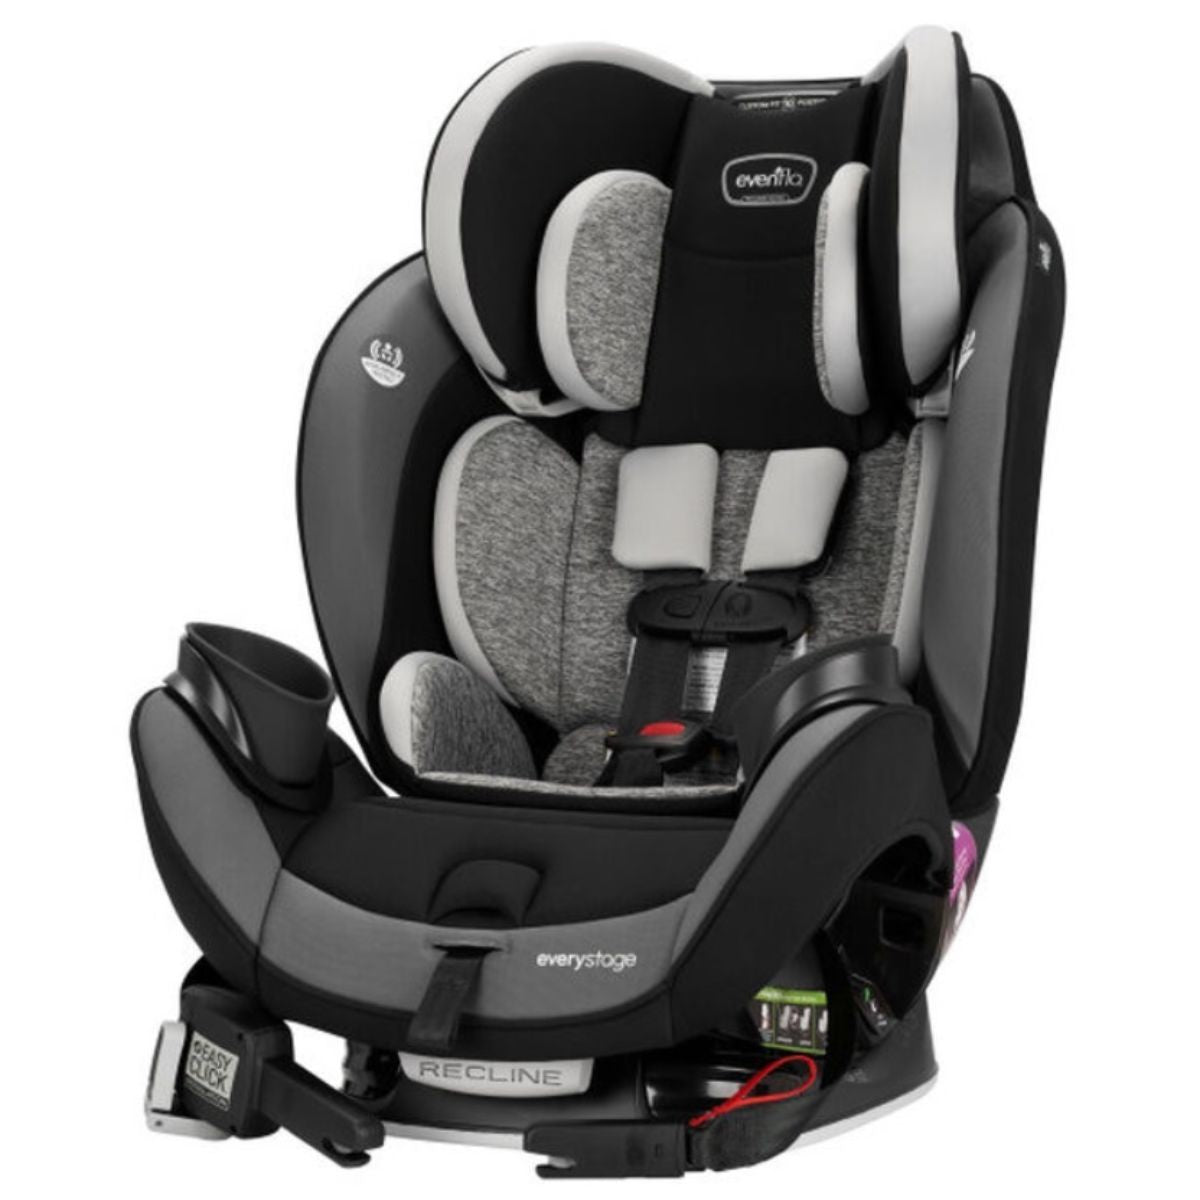 ASIENTO DE AUTO  EVERY STAGES DLX CANYONS